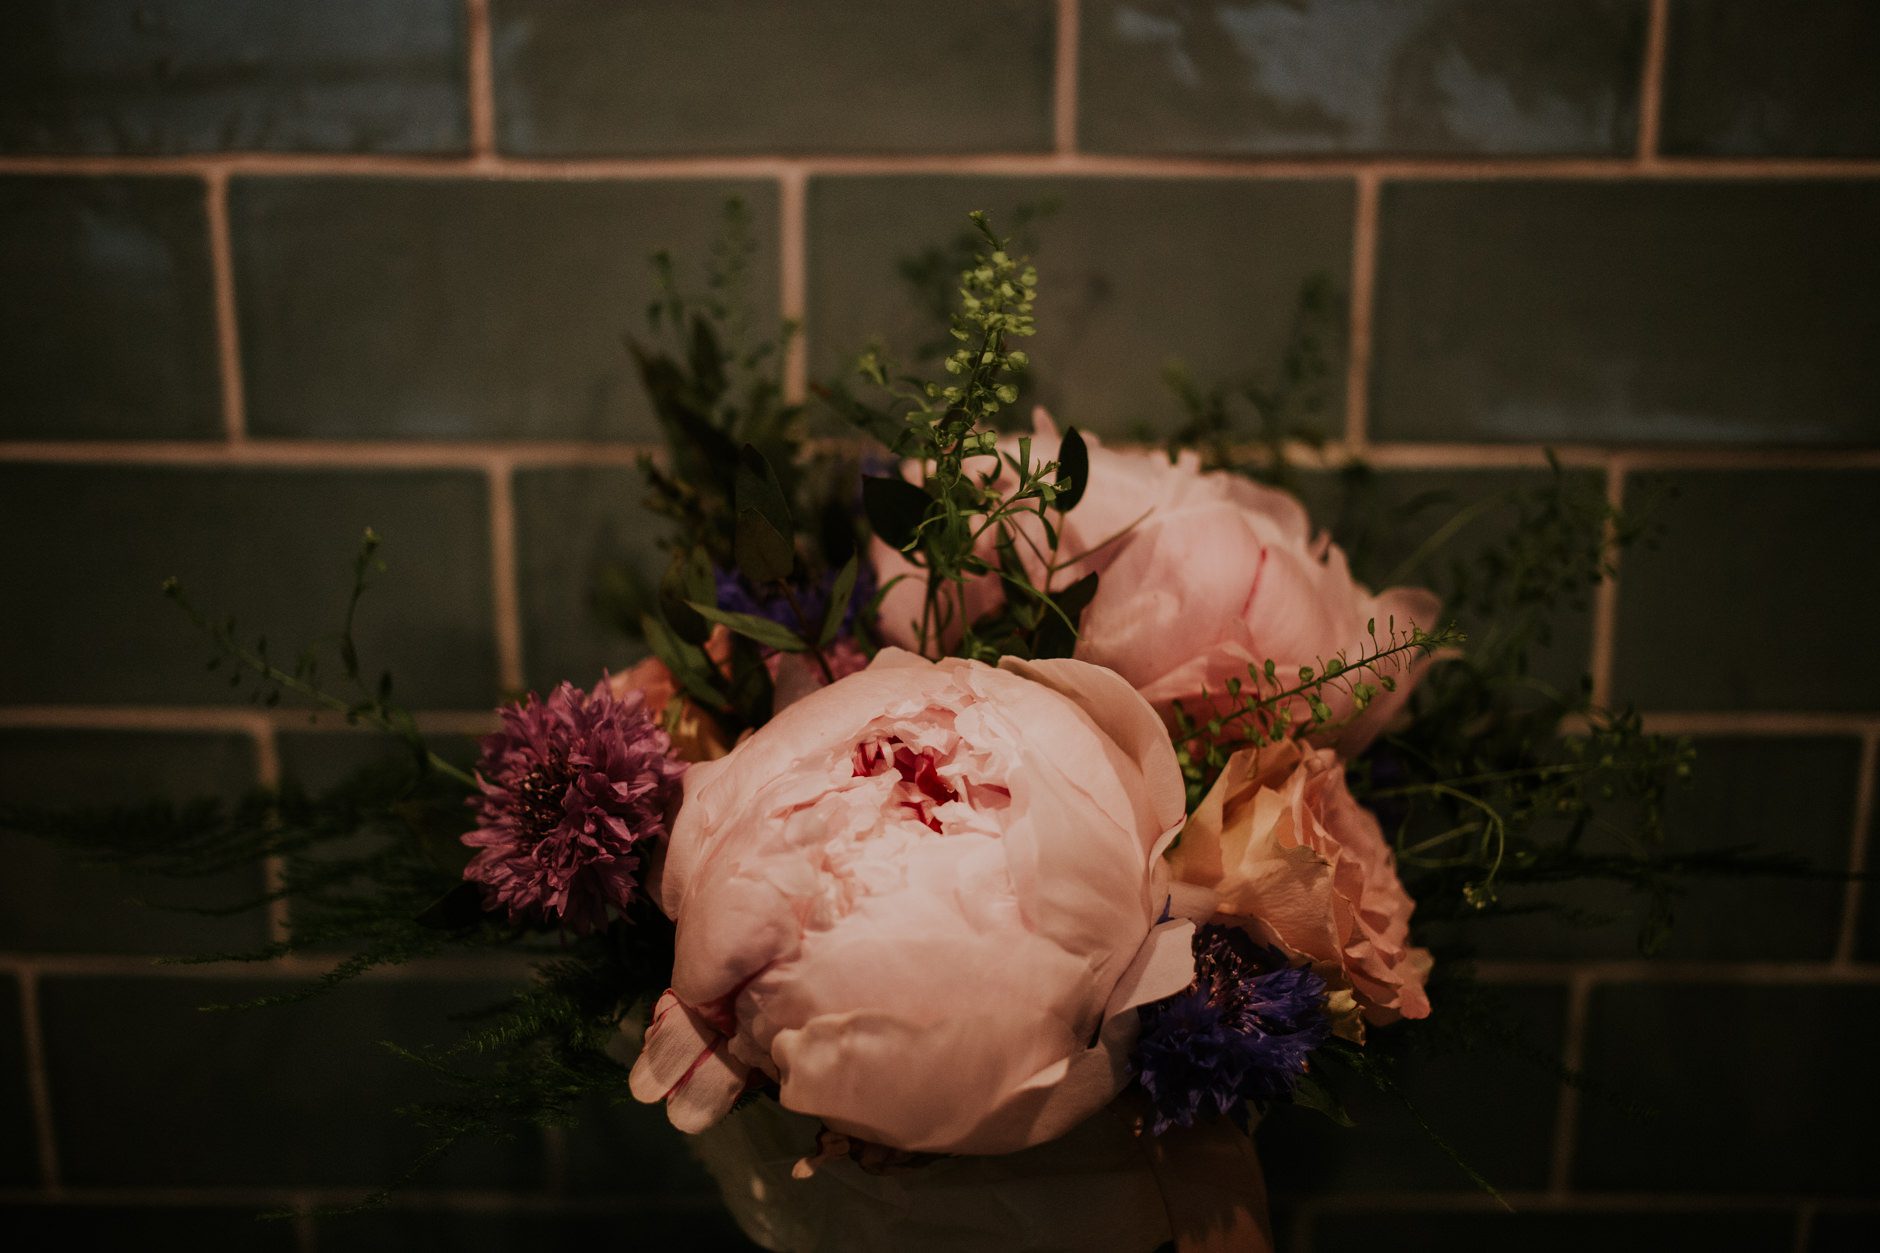 Lovely wedding boquet with peonies